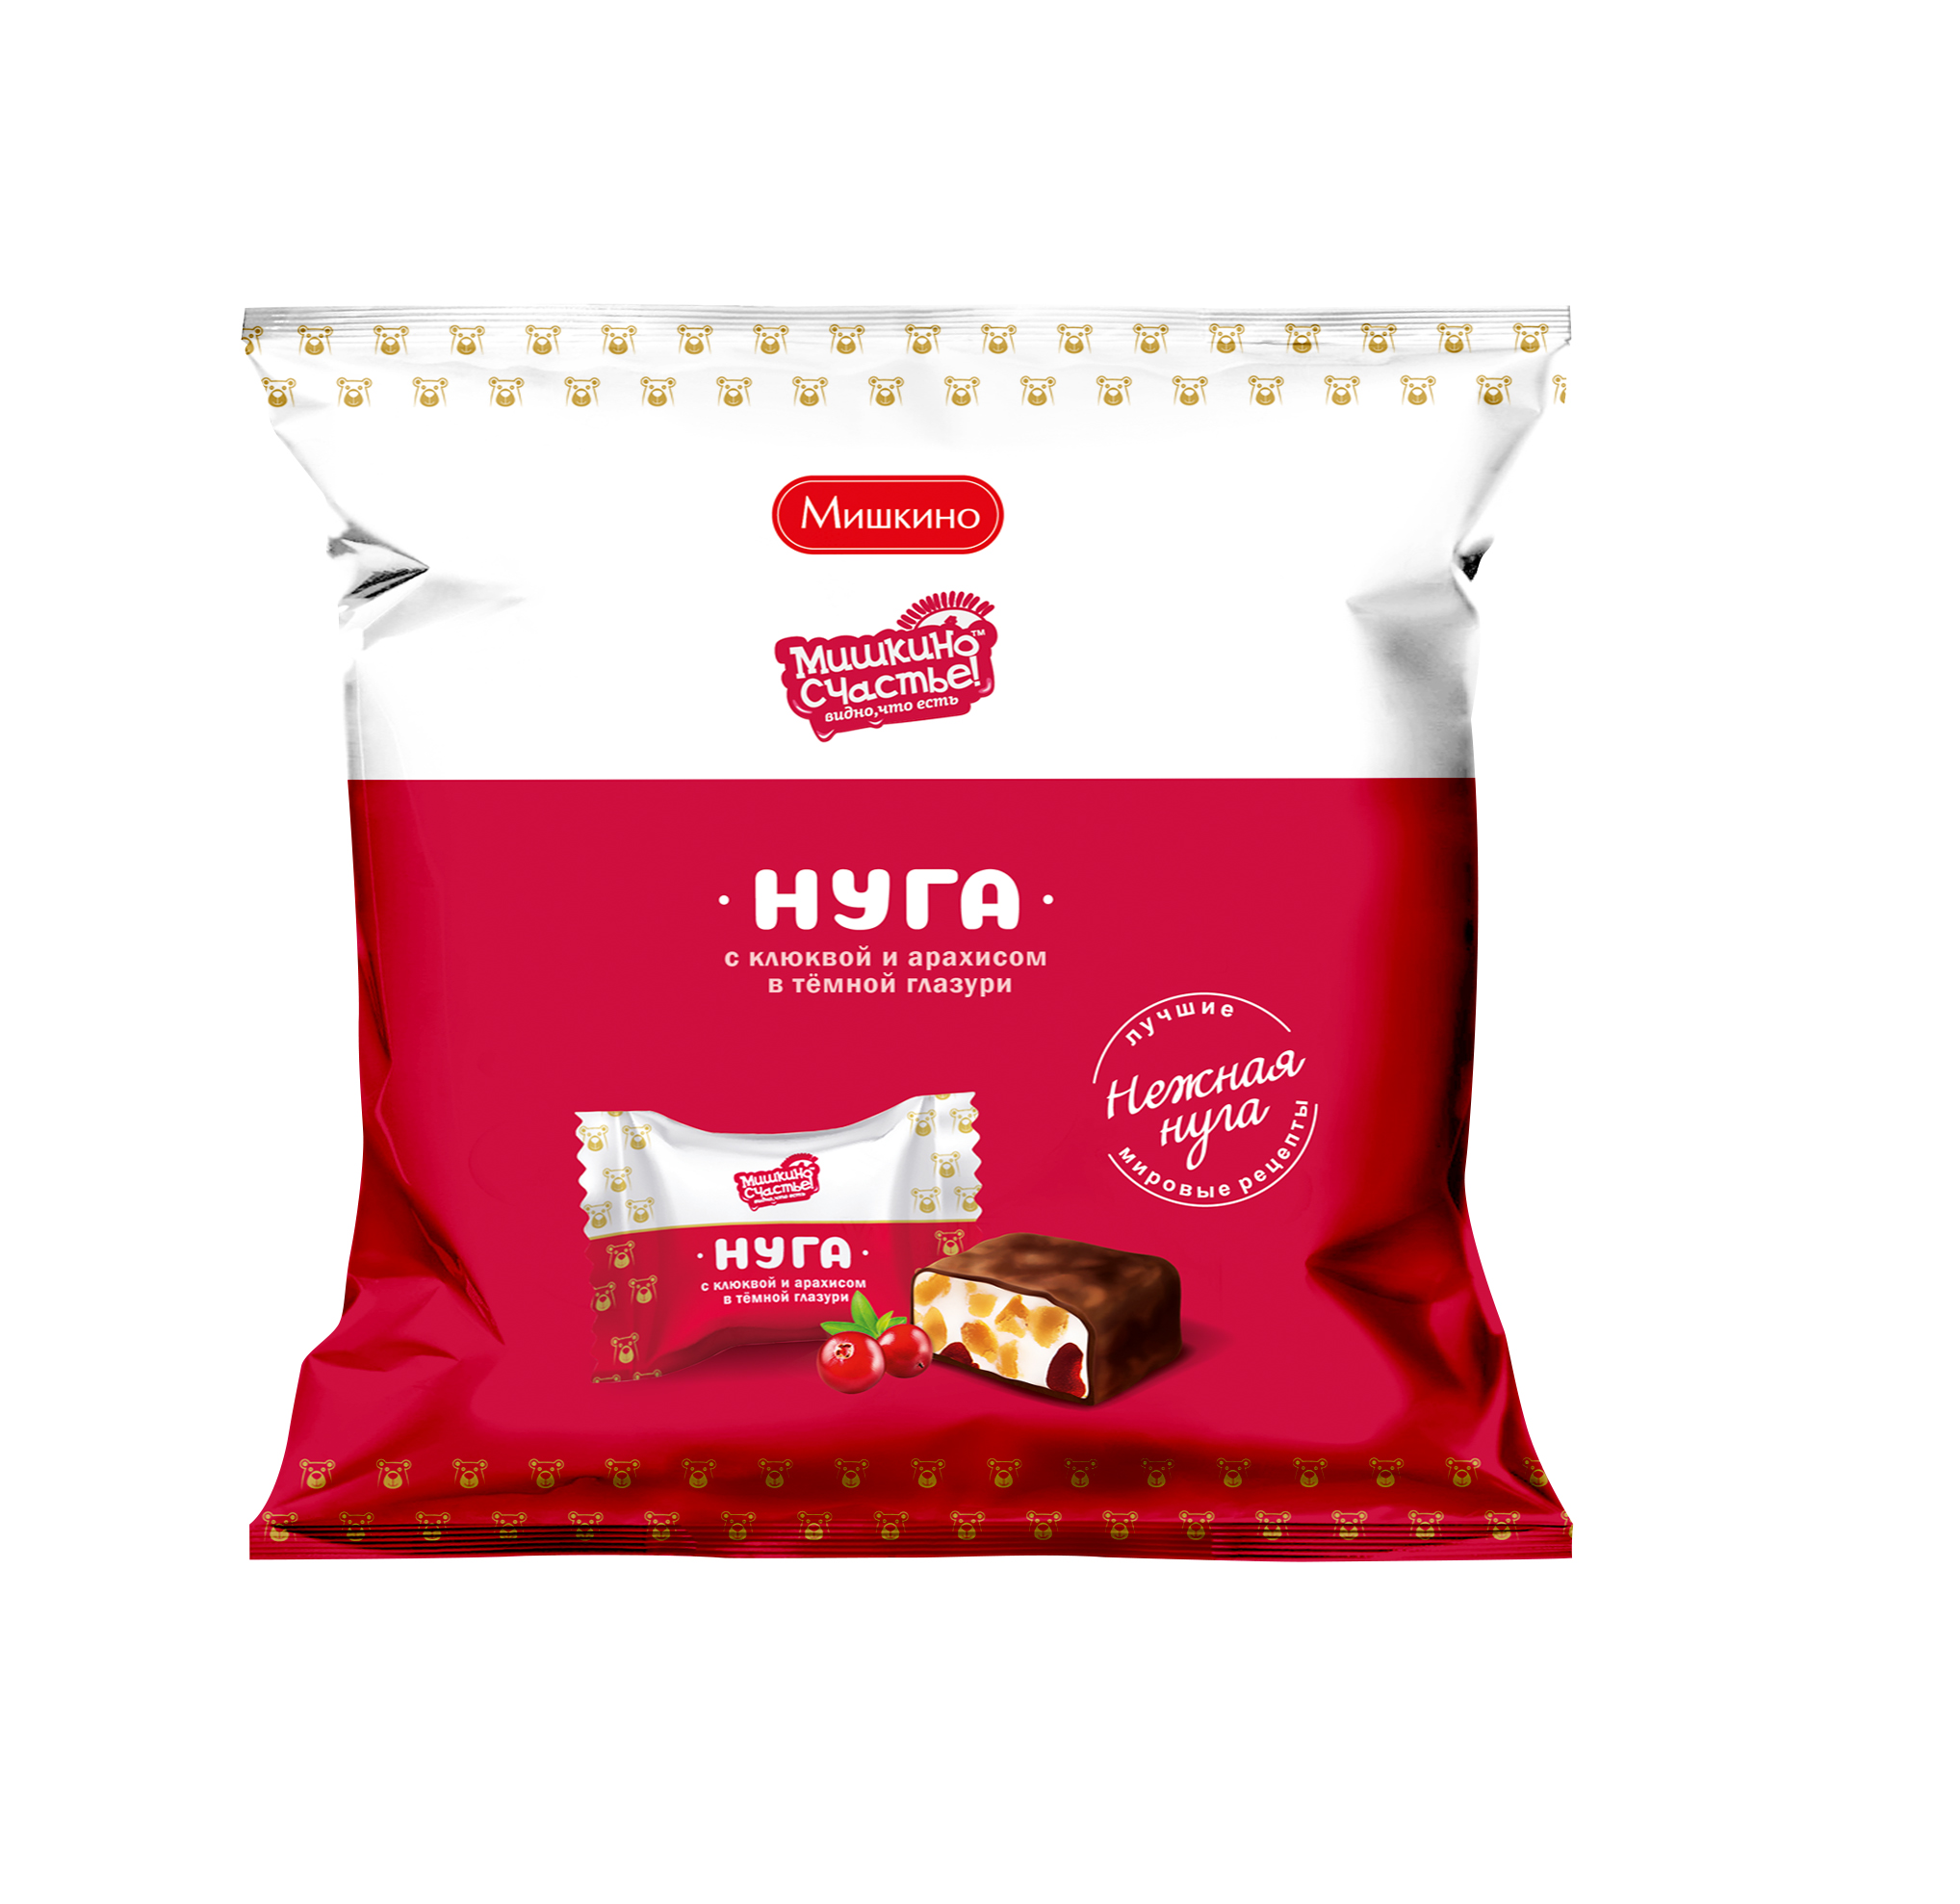 Nougat with peanuts and cranberries sweets covered with glaze "Mishkino happiness" 240 g. (24), 240 g.